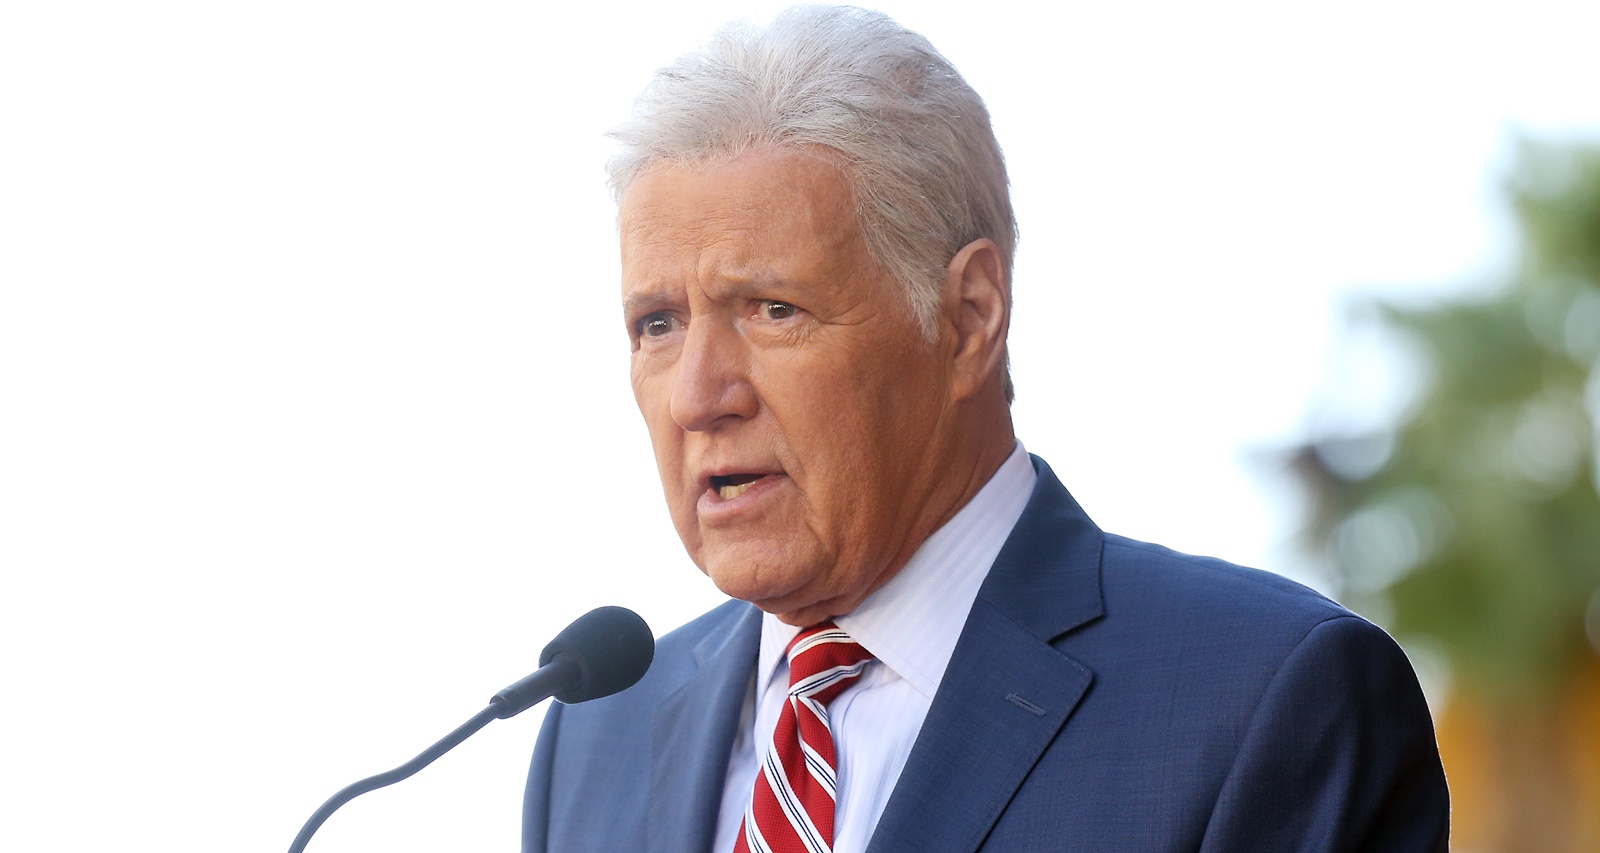 When is Alex Trebek Leaving Jeopardy? What Happened to Him?